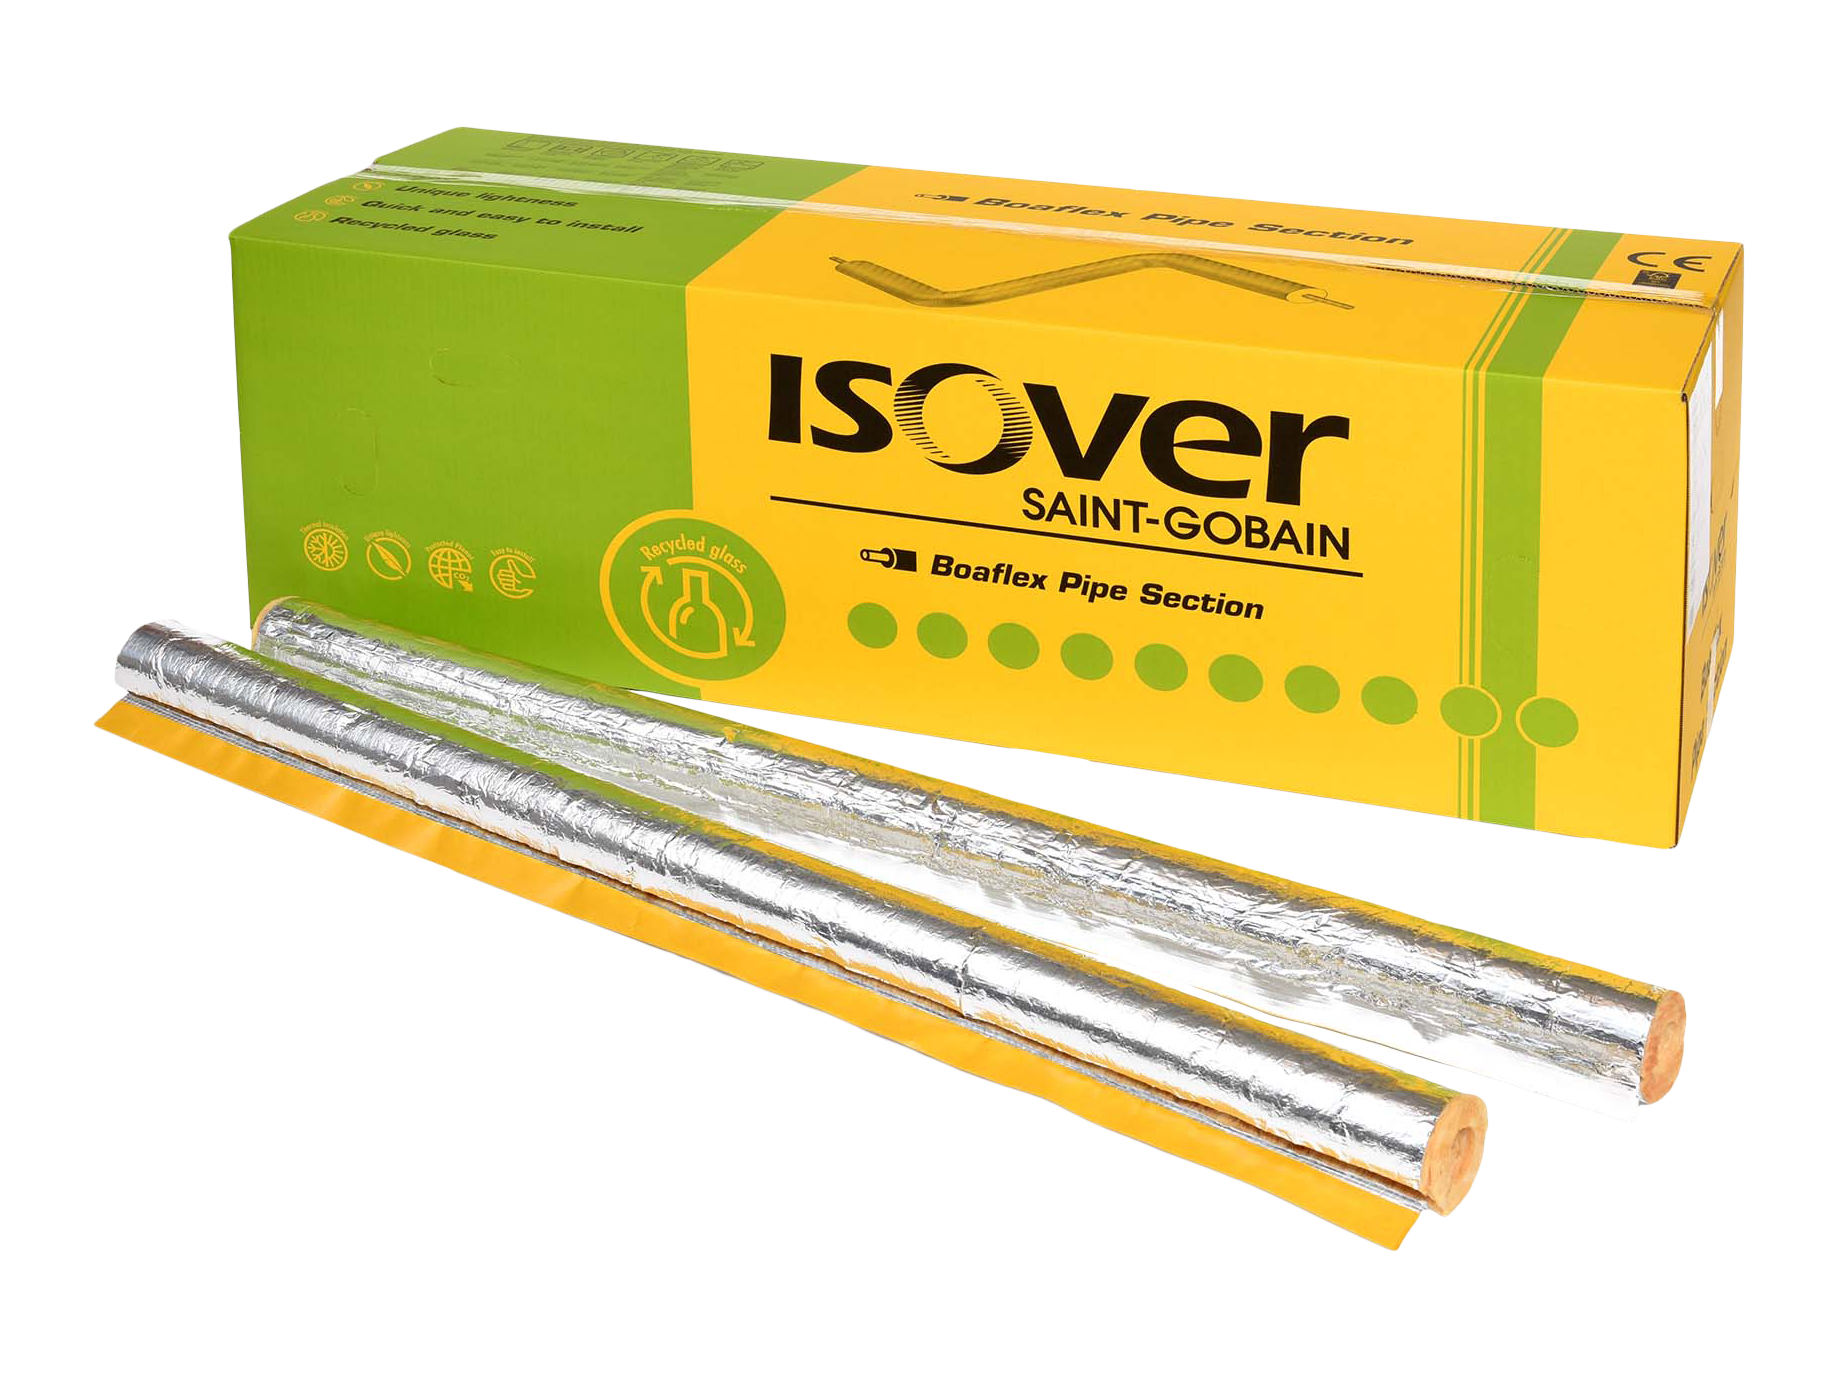 ISOVER Boaflex Pipe Section 54/60